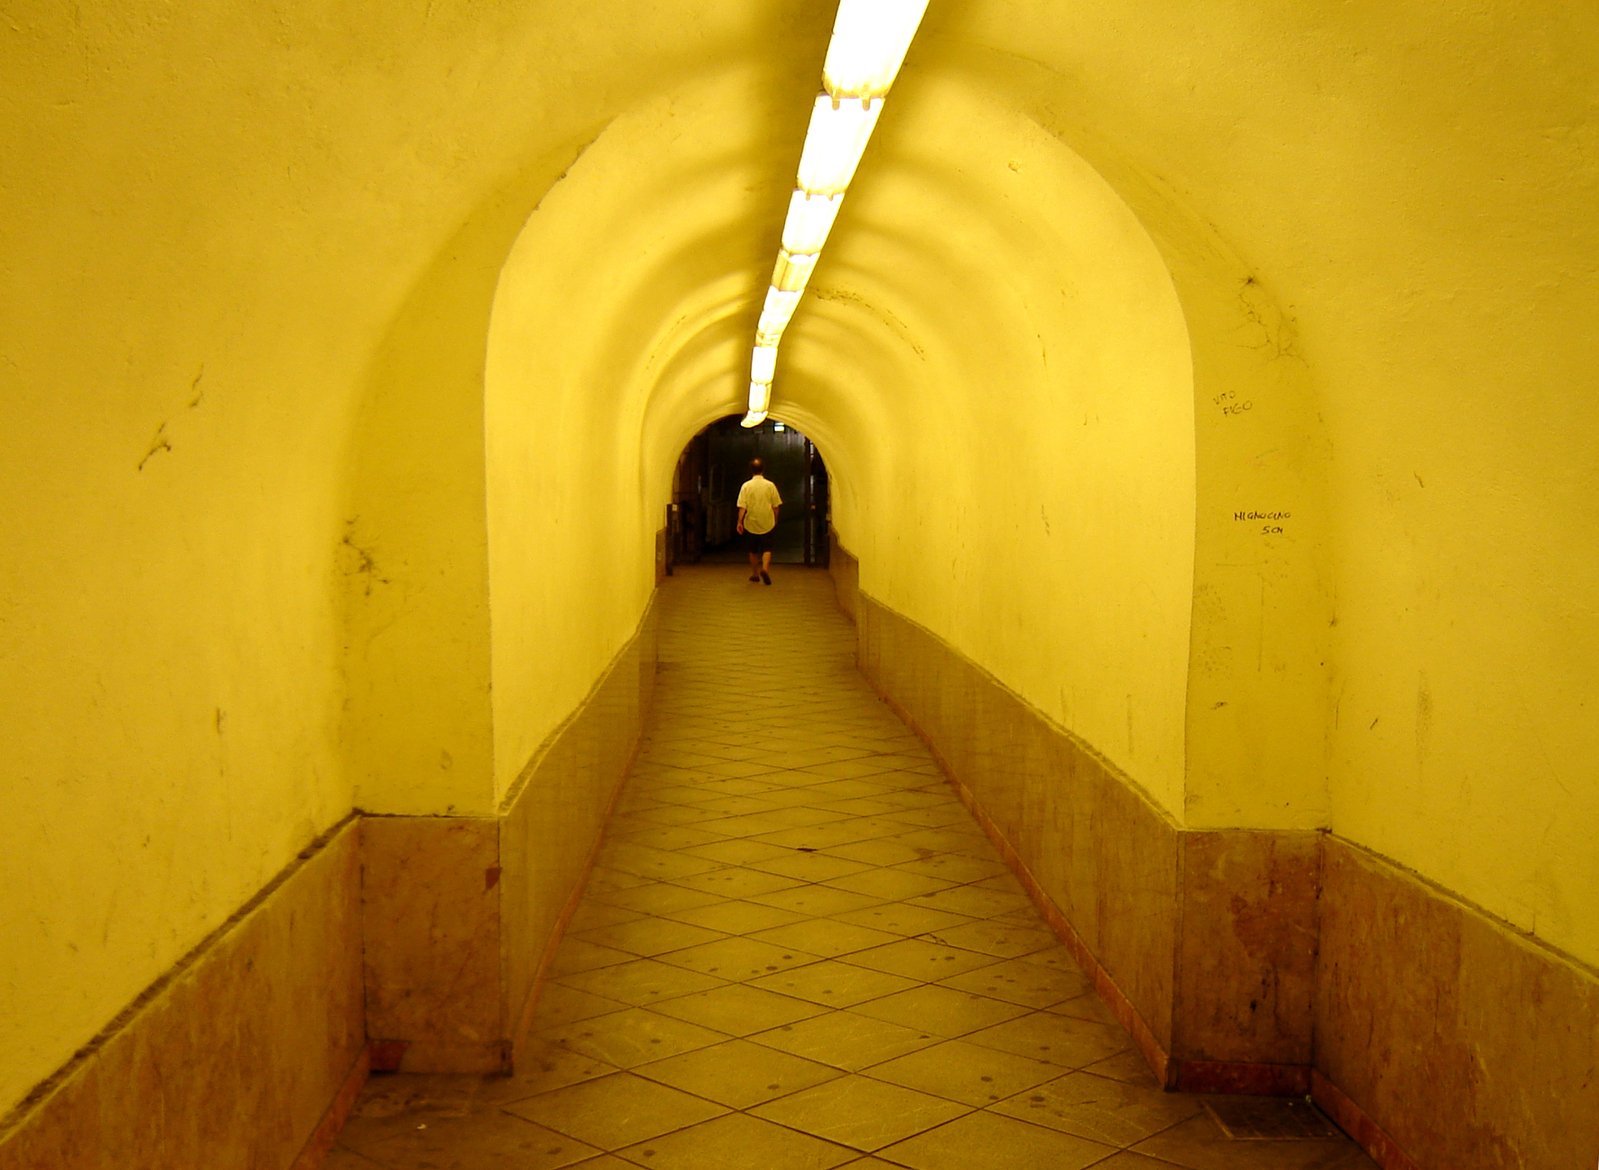 the inside of an empty yellow tunnel with tiled floors